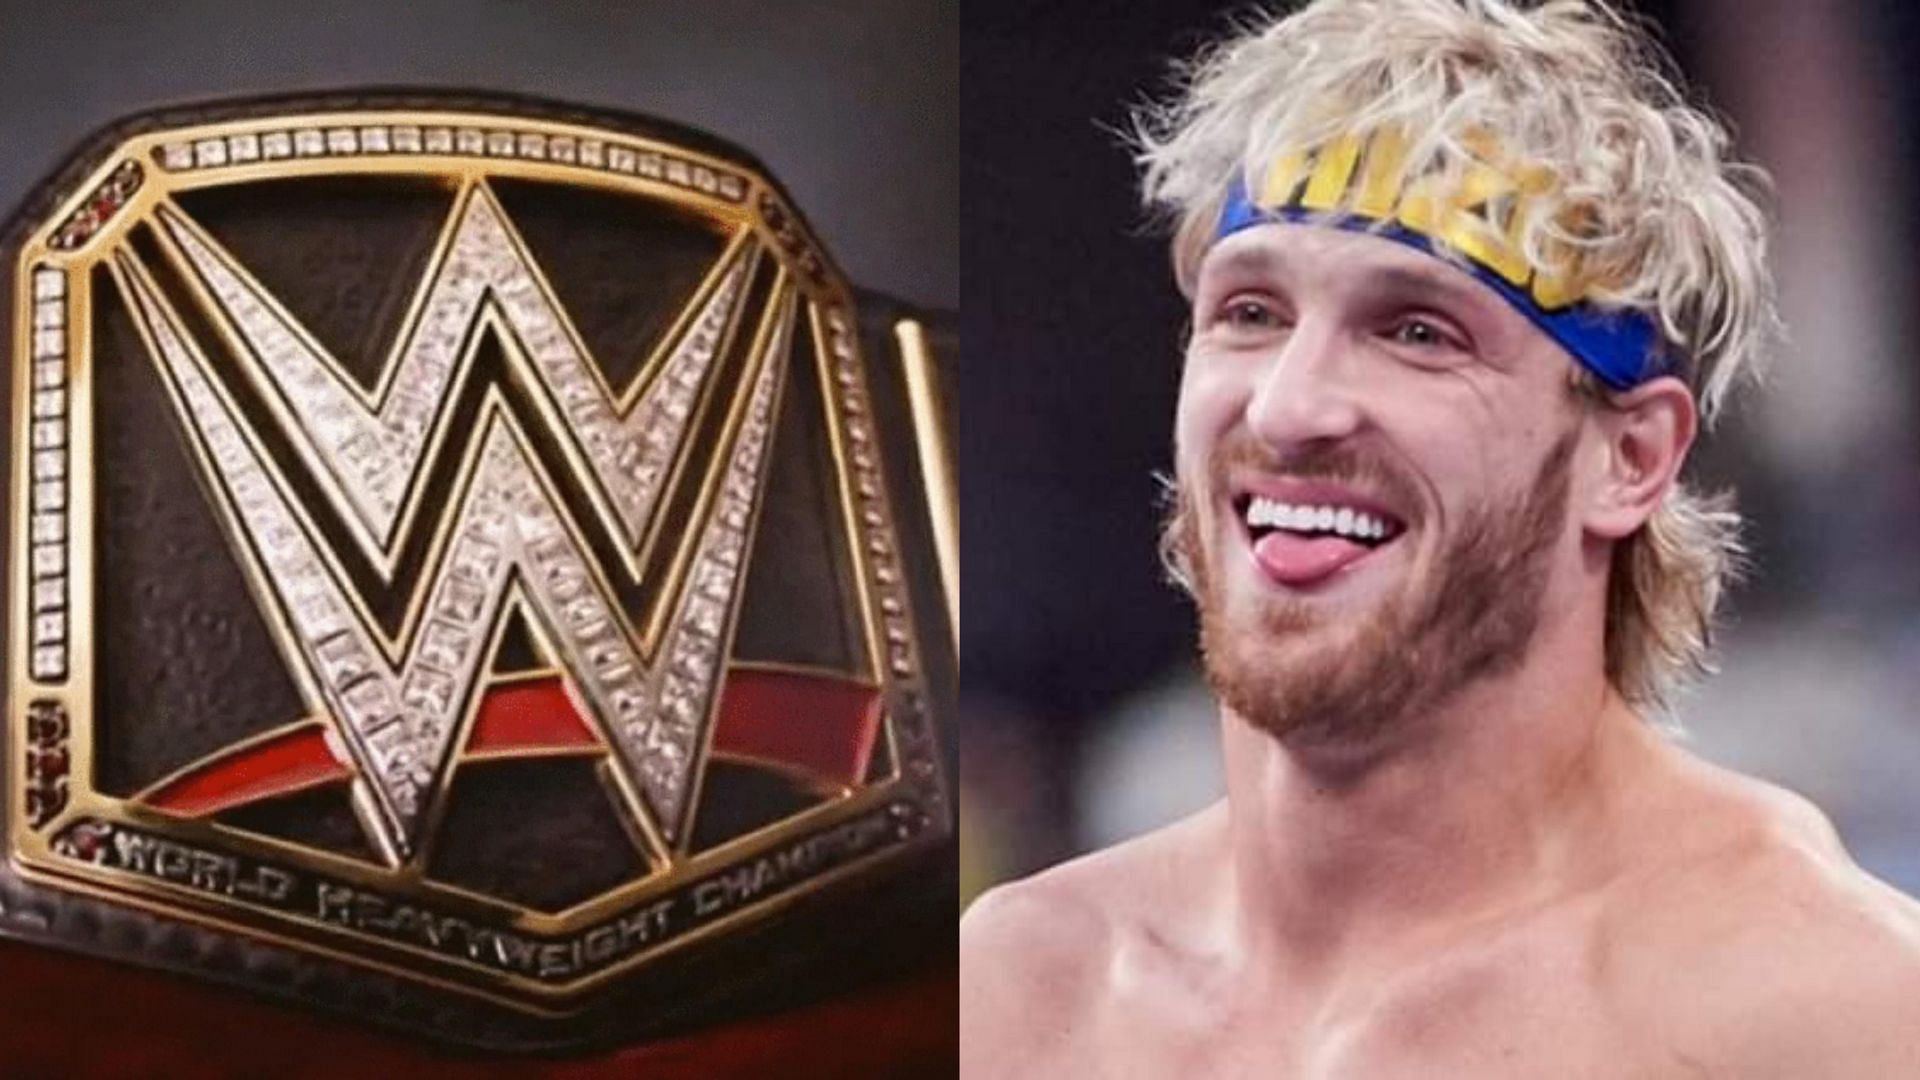 Logan Paul has faced some of WWE